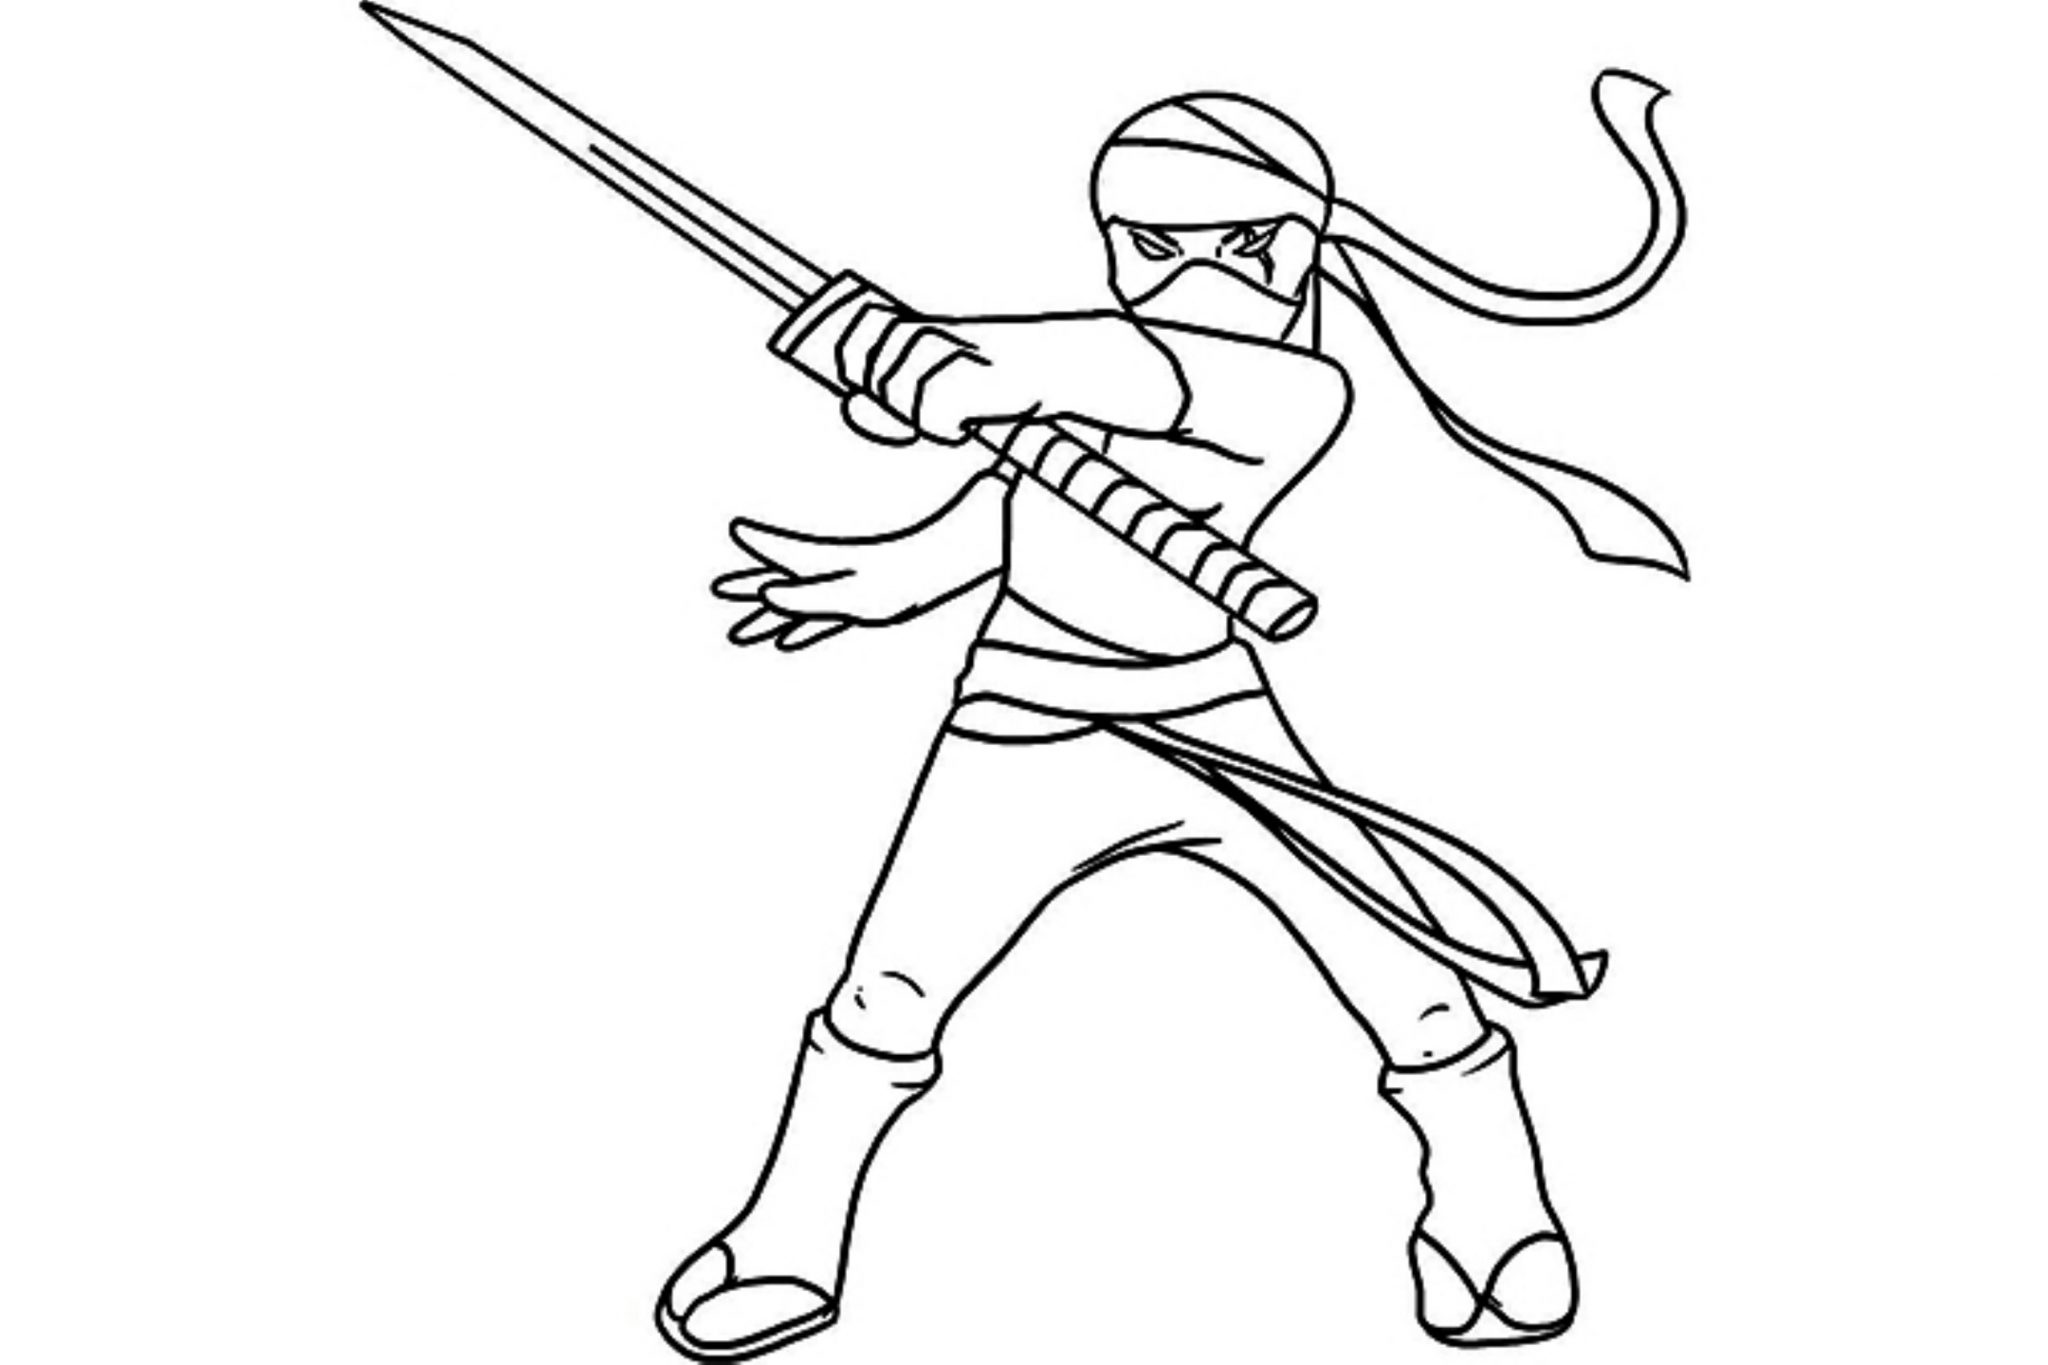 Print Download The Attractive Ninja Coloring Pages for